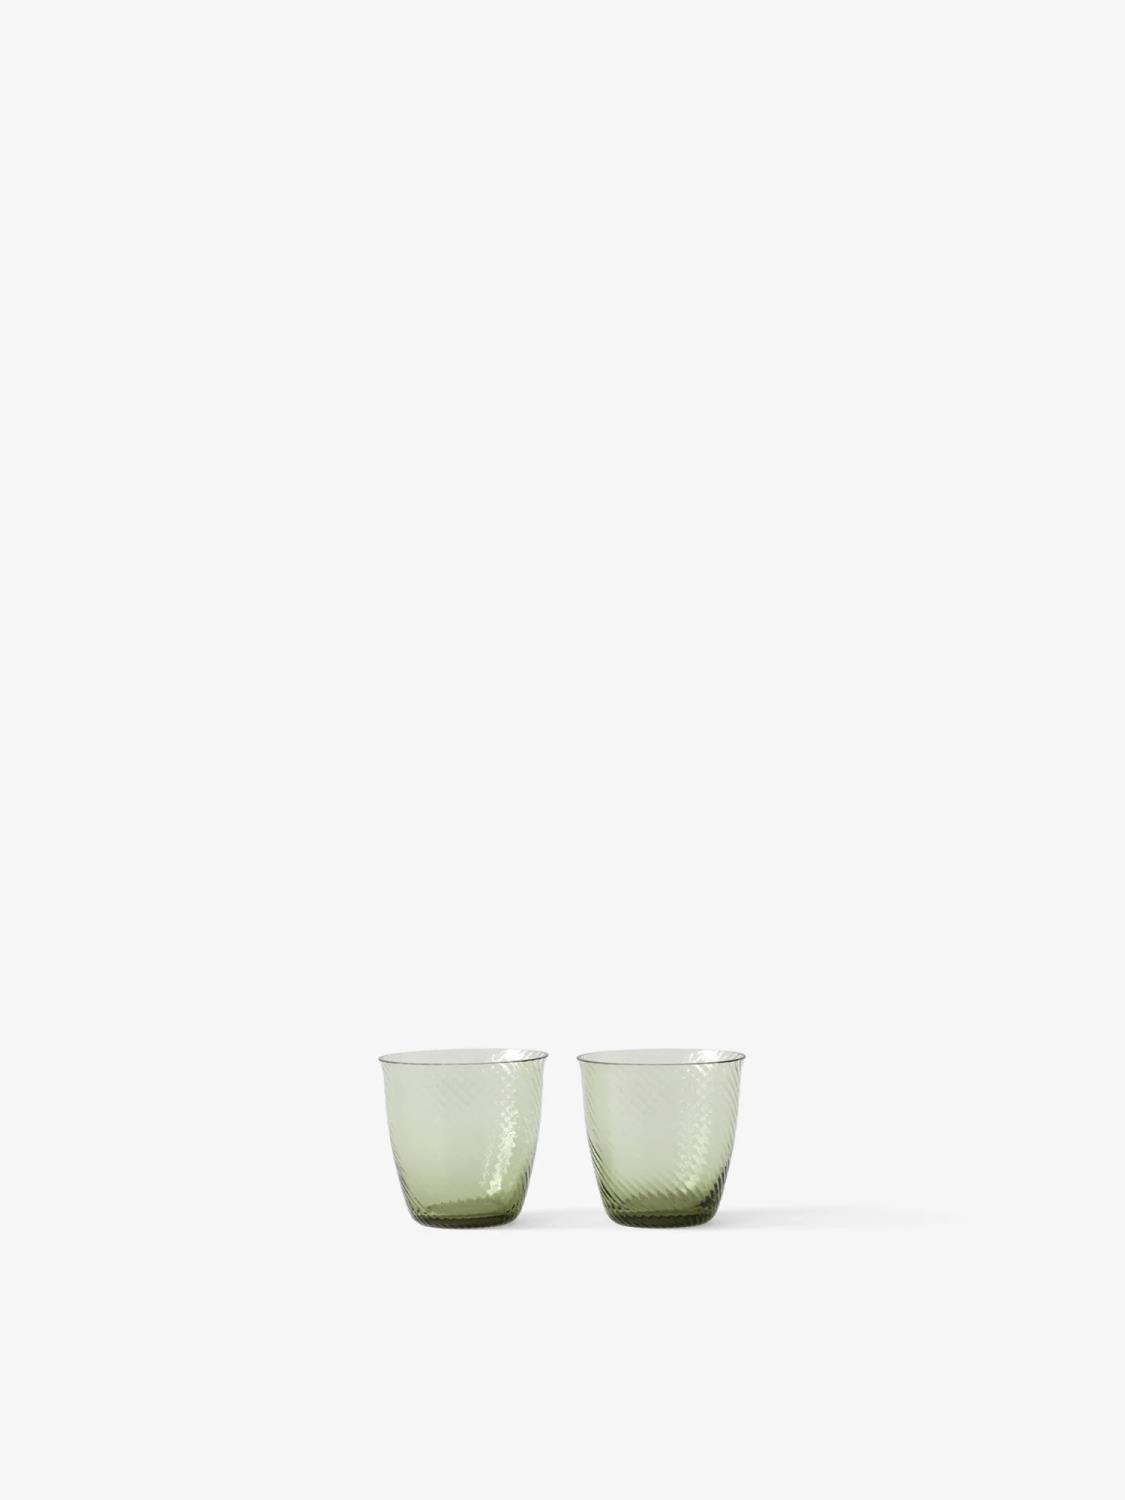 &Tradition - Collect Glass SC78 - Moss 180 ml - 2pk